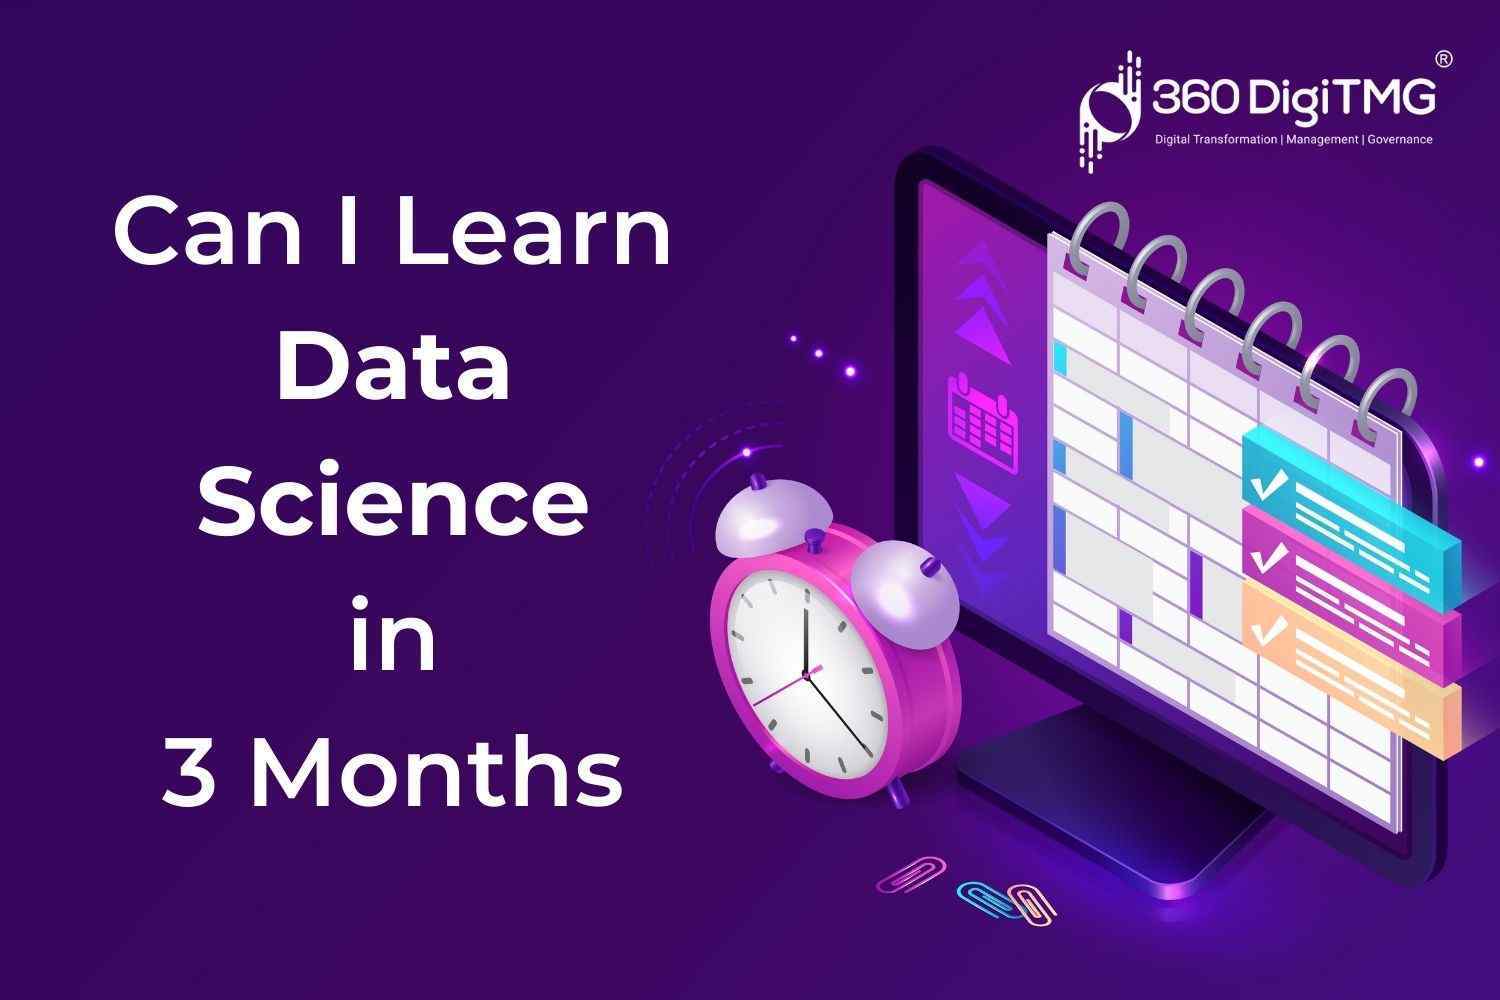 Can I Learn Data Science in 3 Months?